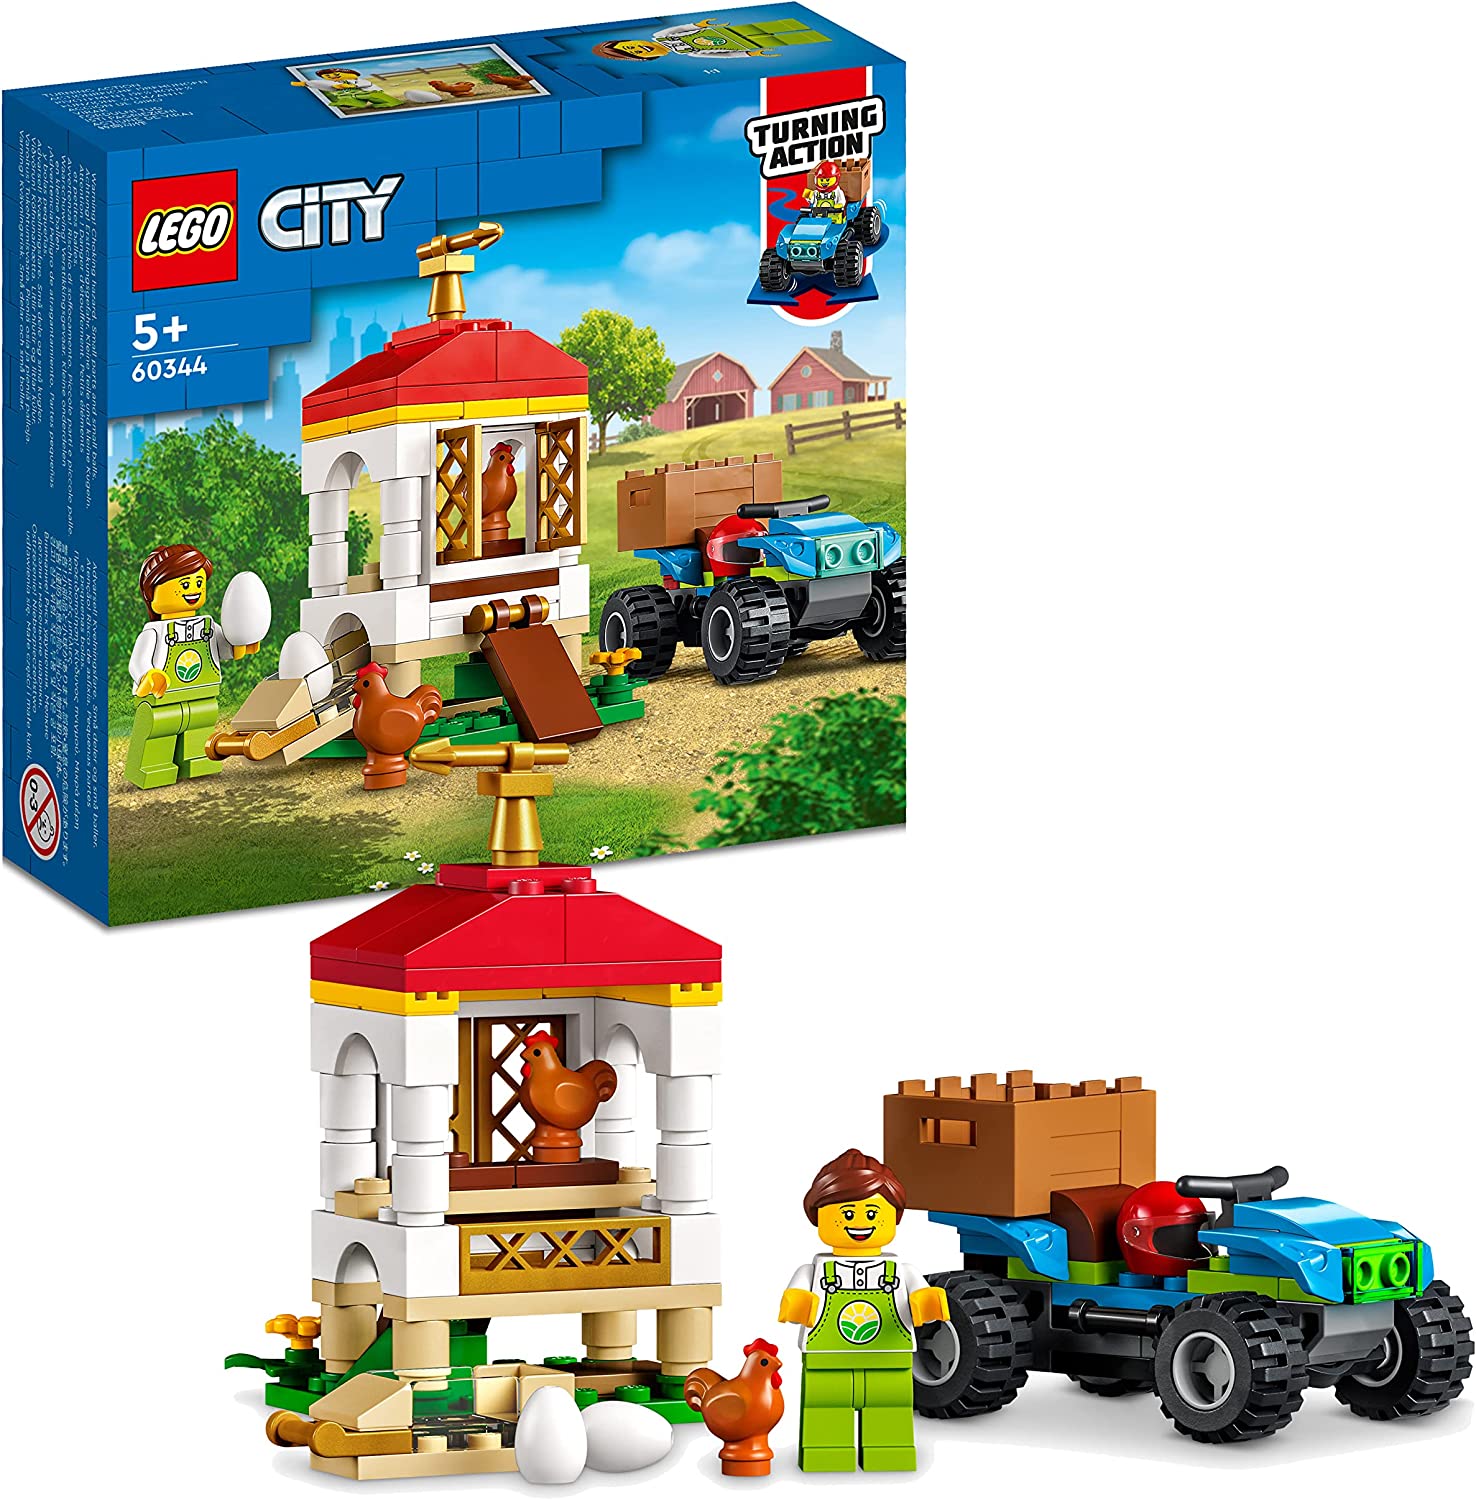 LEGO 60344 City Farm Chicken Coop, Farm Toy for Children from 5 Years with Animal Figures, Quad and Farmer\'s Mini Figure